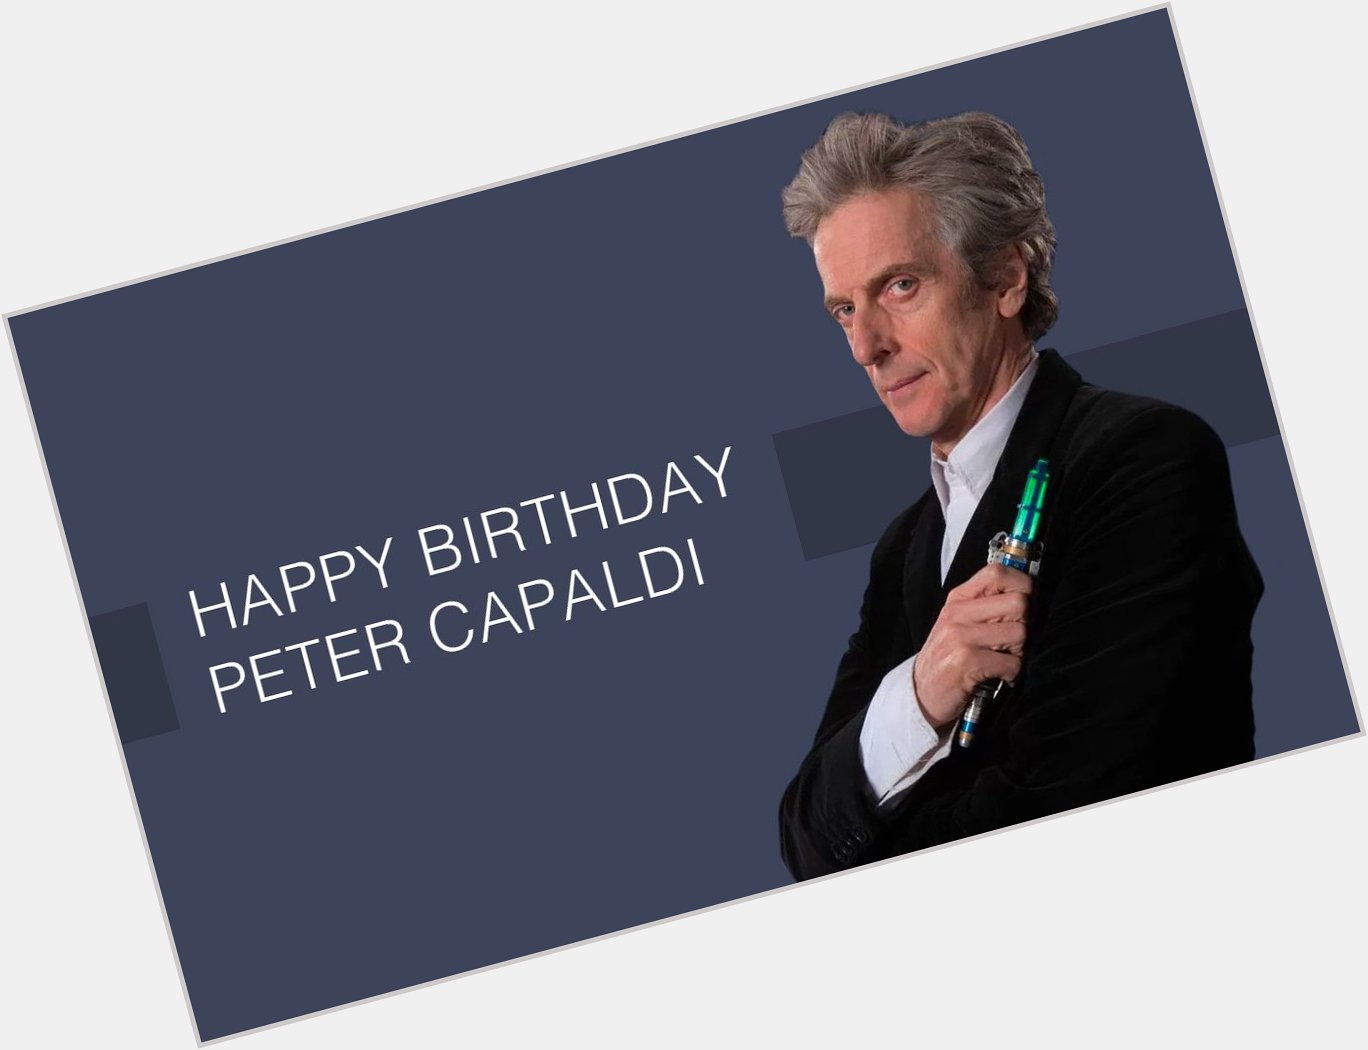 Happy birthday to the Twelfth Doctor himself, Peter Capaldi, from everyone at The Gallifrey Times!  